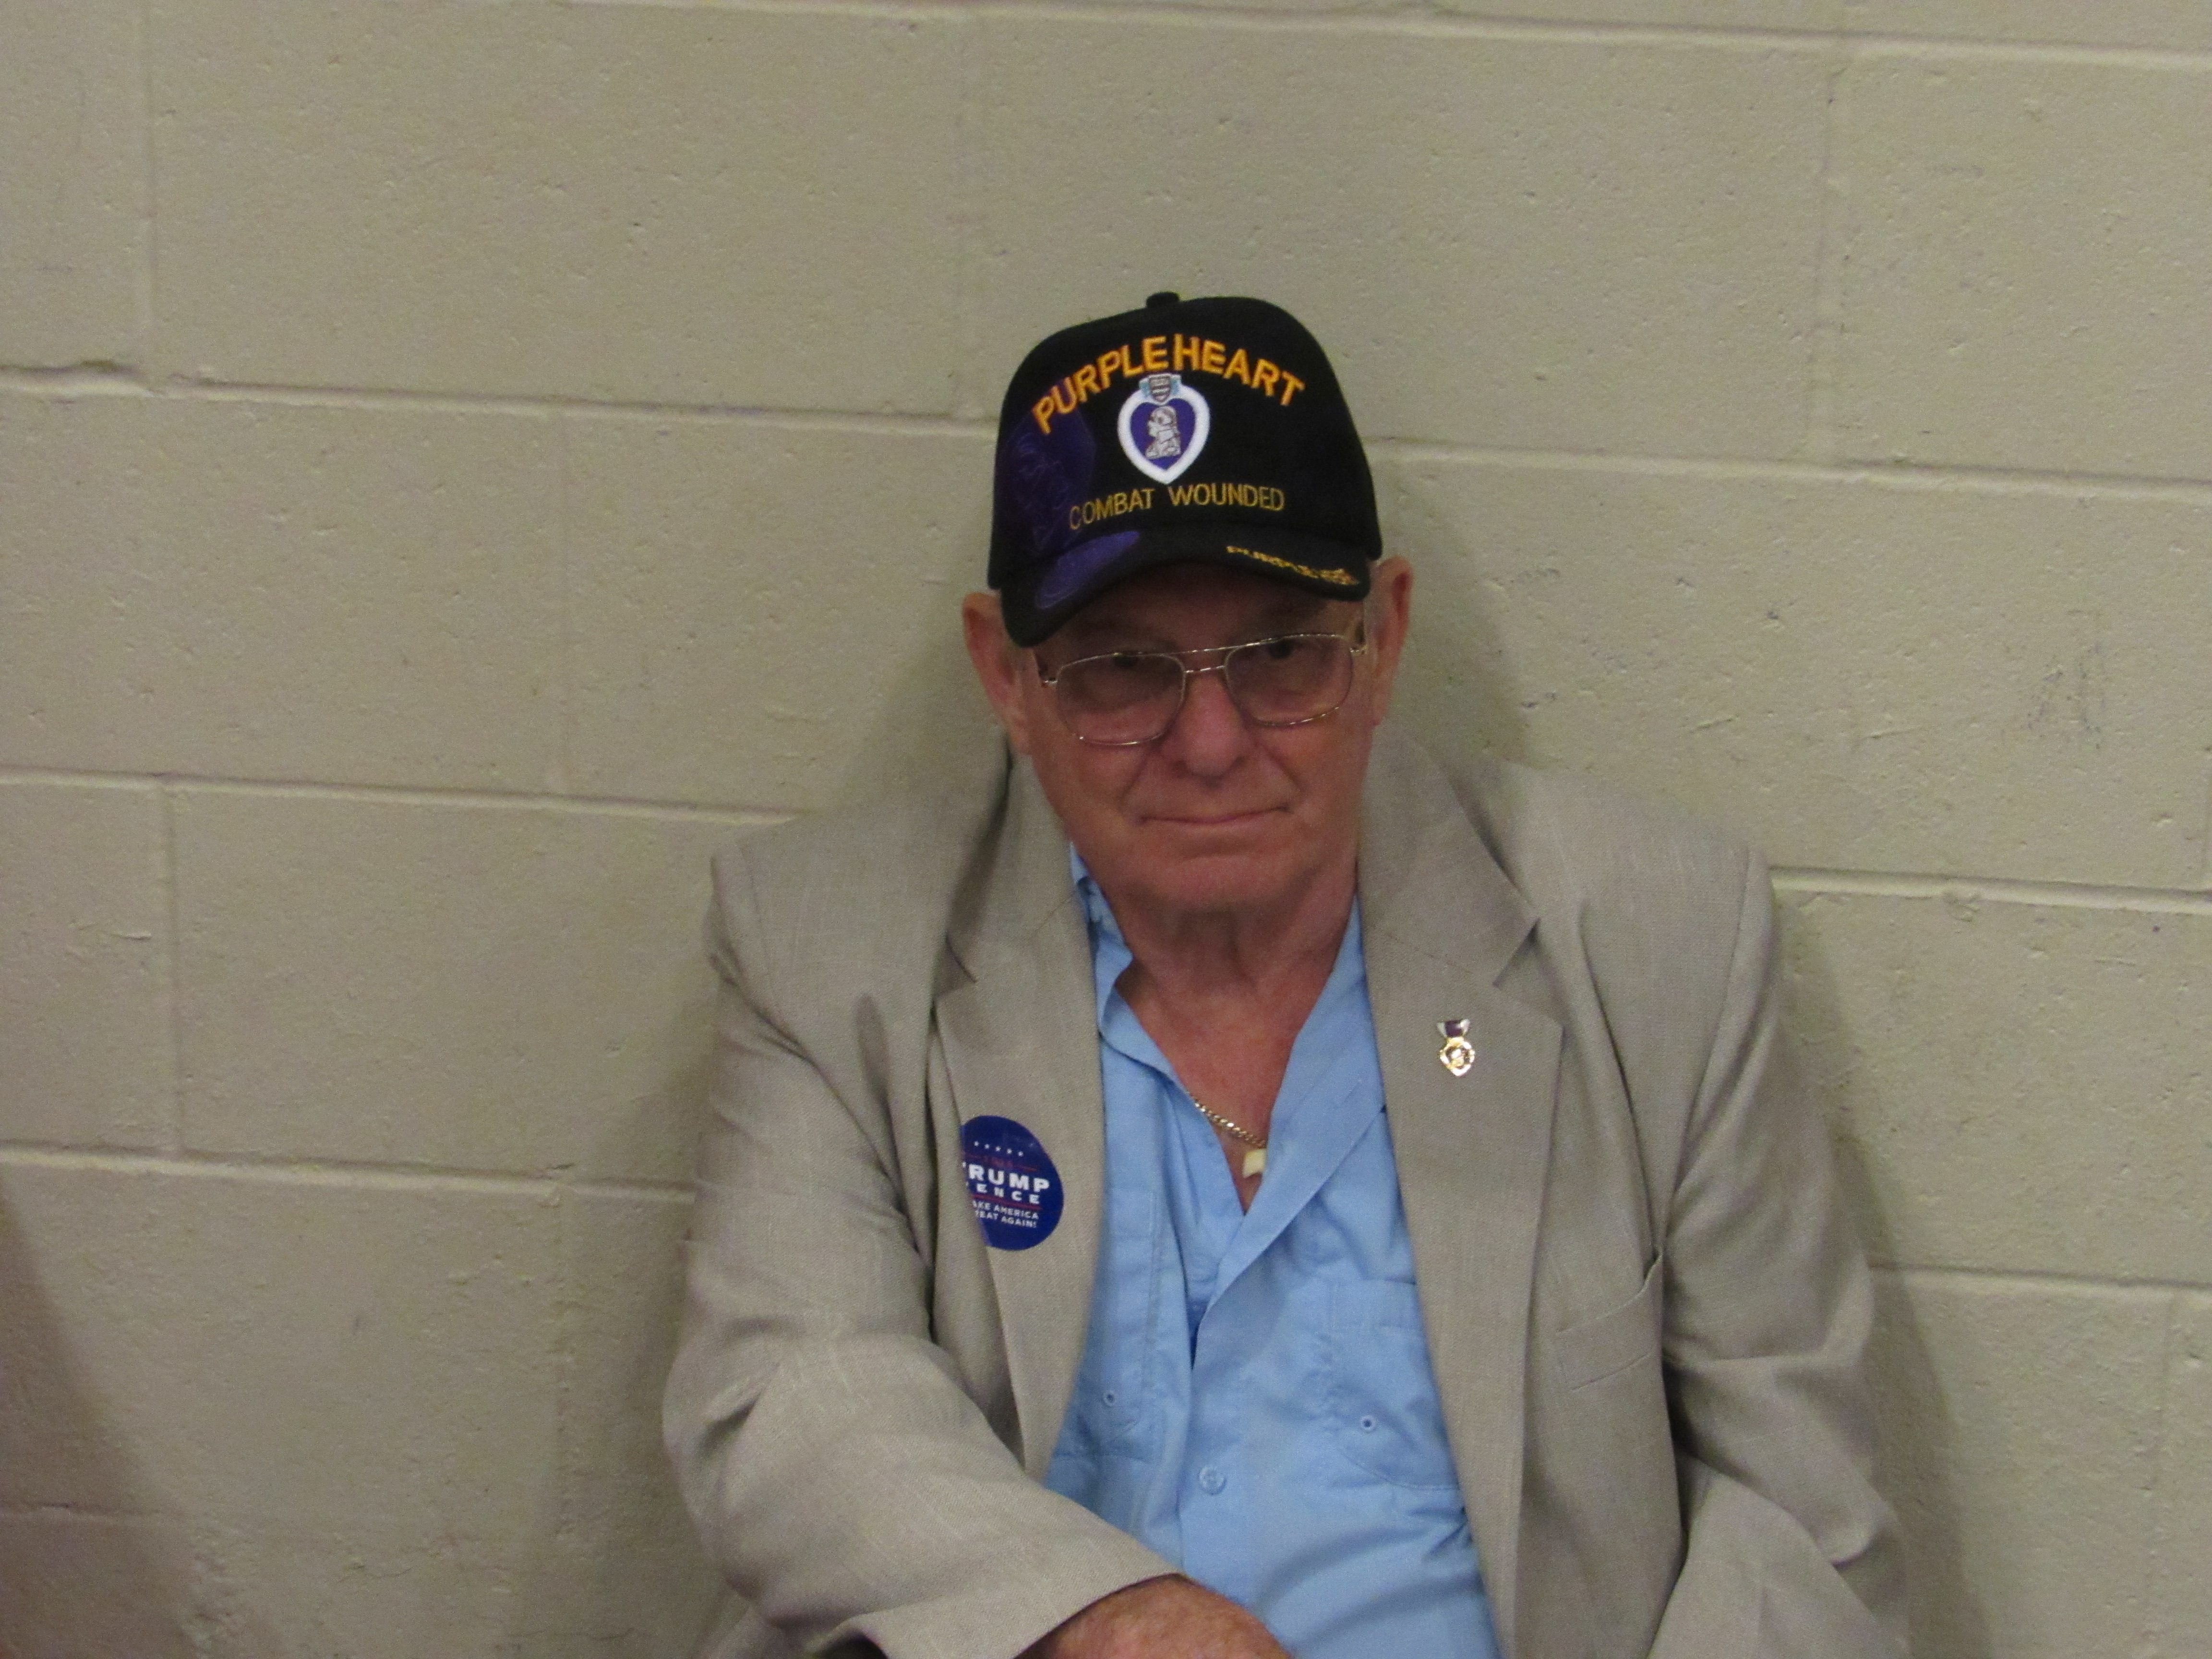 Purple Heart recipient rests before Trump West Palm Beach rally